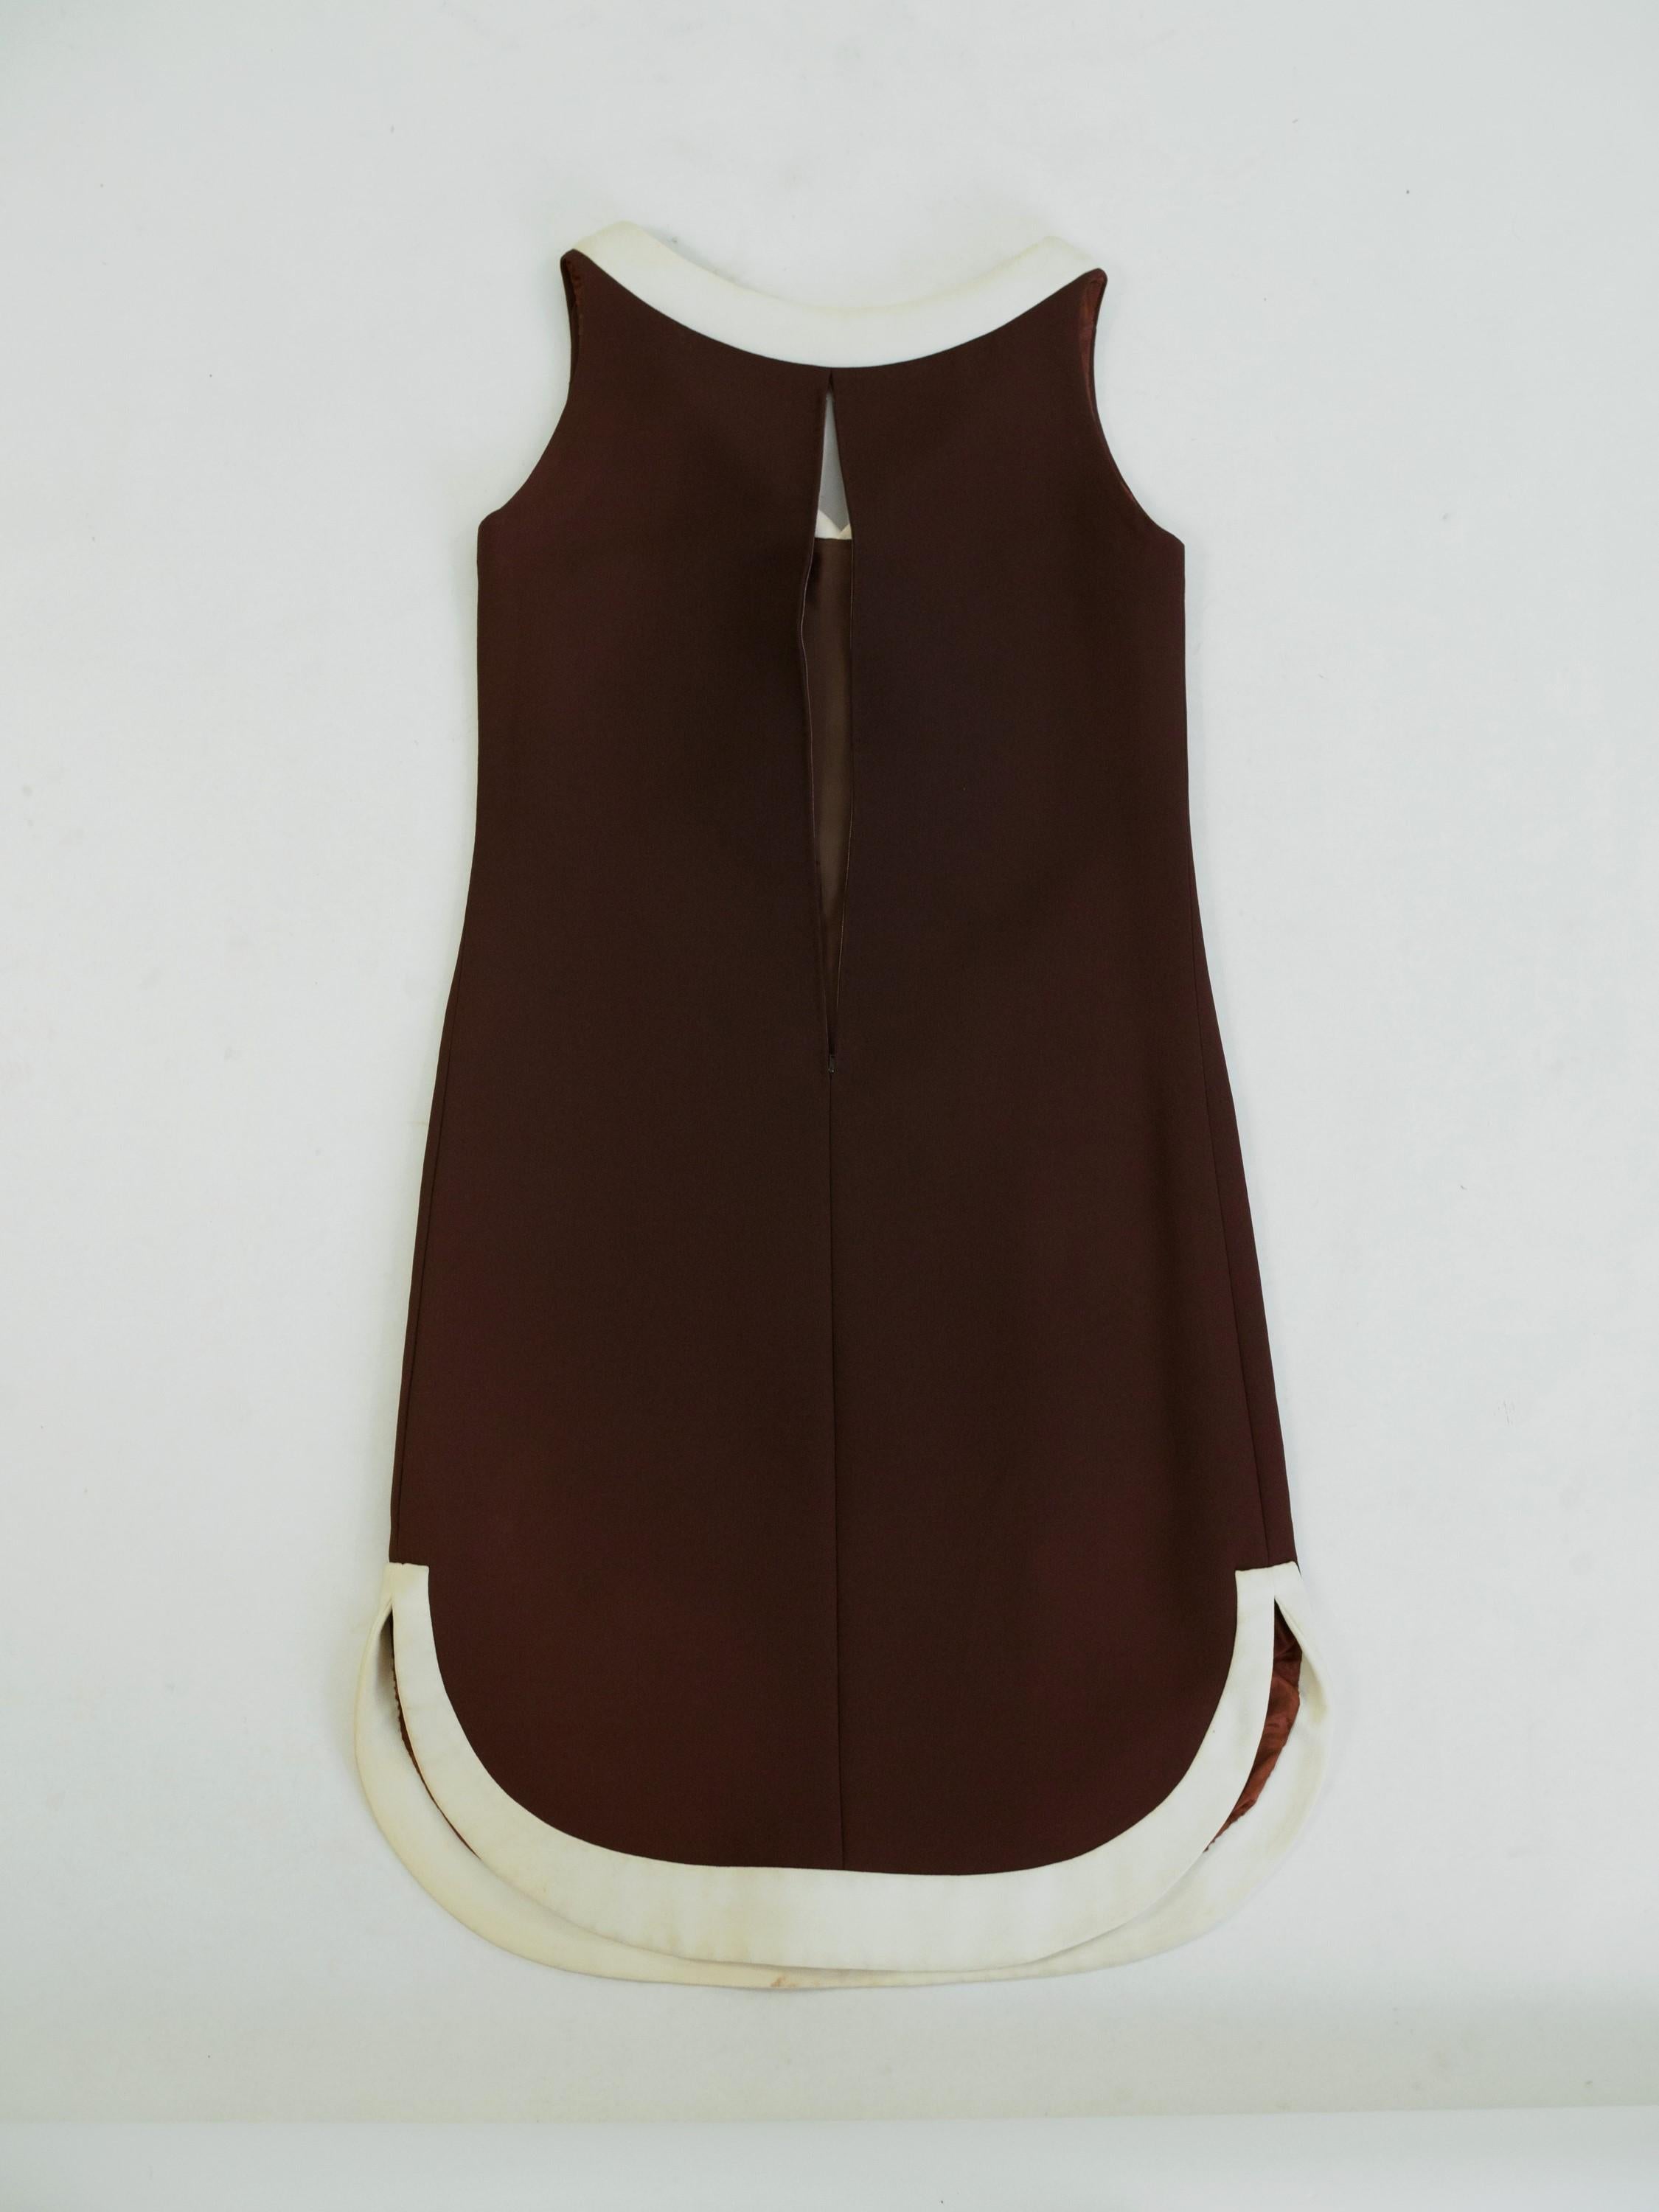 A Space Age Pierre Cardin Dress in chocolate jersey Circa 1970/1975 In Good Condition For Sale In Toulon, FR